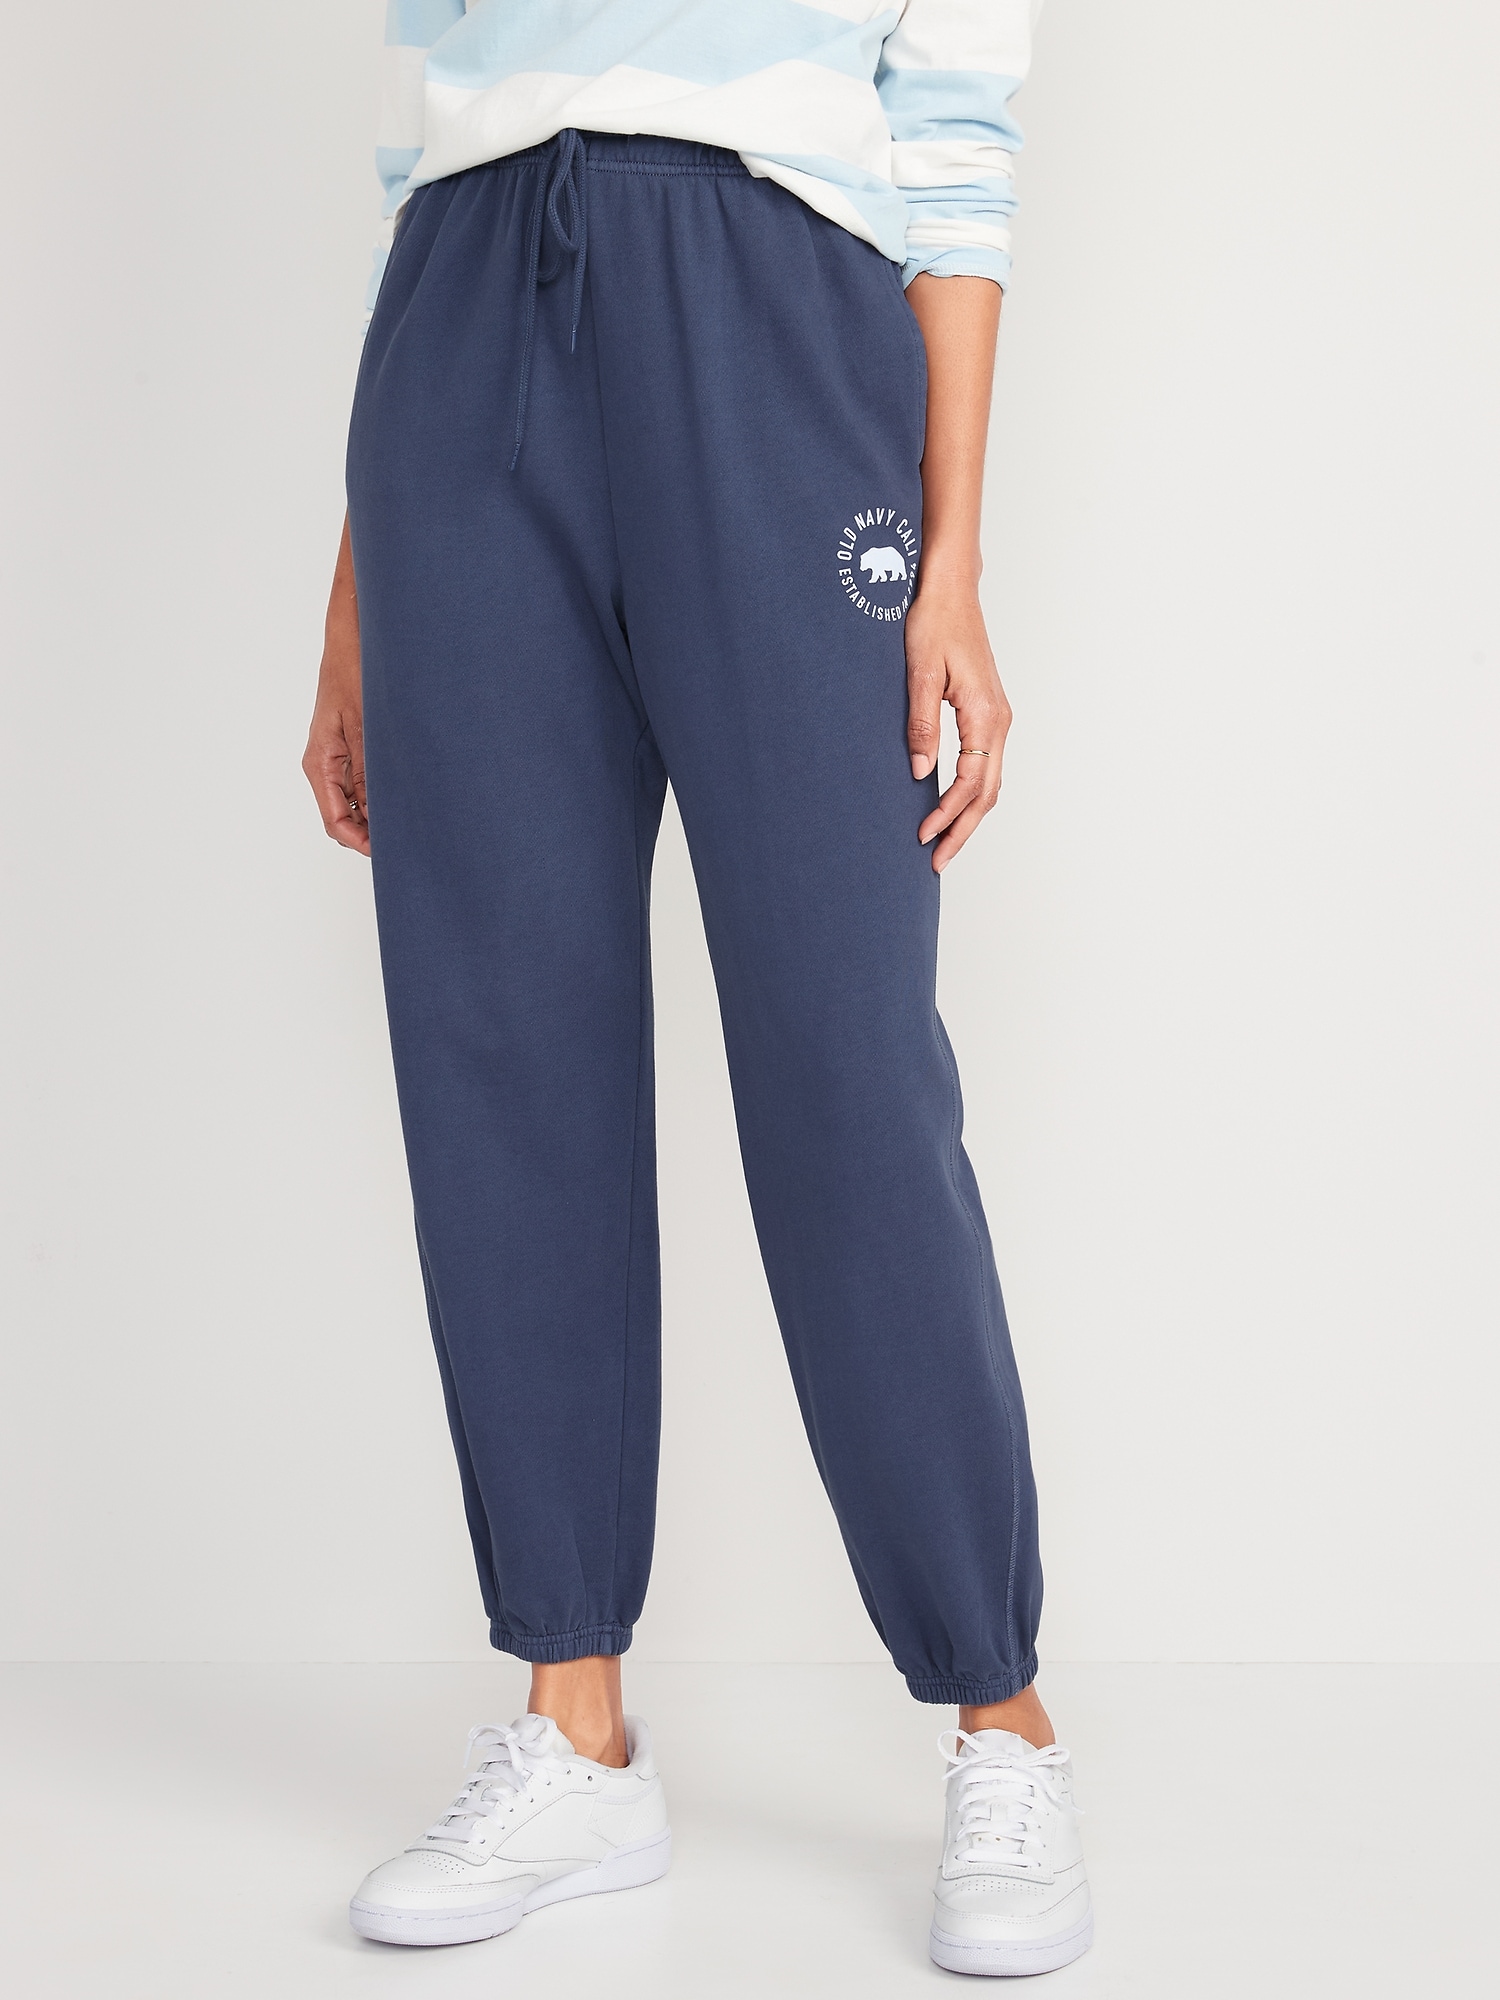 Old Navy Extra High-Waisted Vintage Garment-Dyed Logo Sweatpants for Women blue. 1